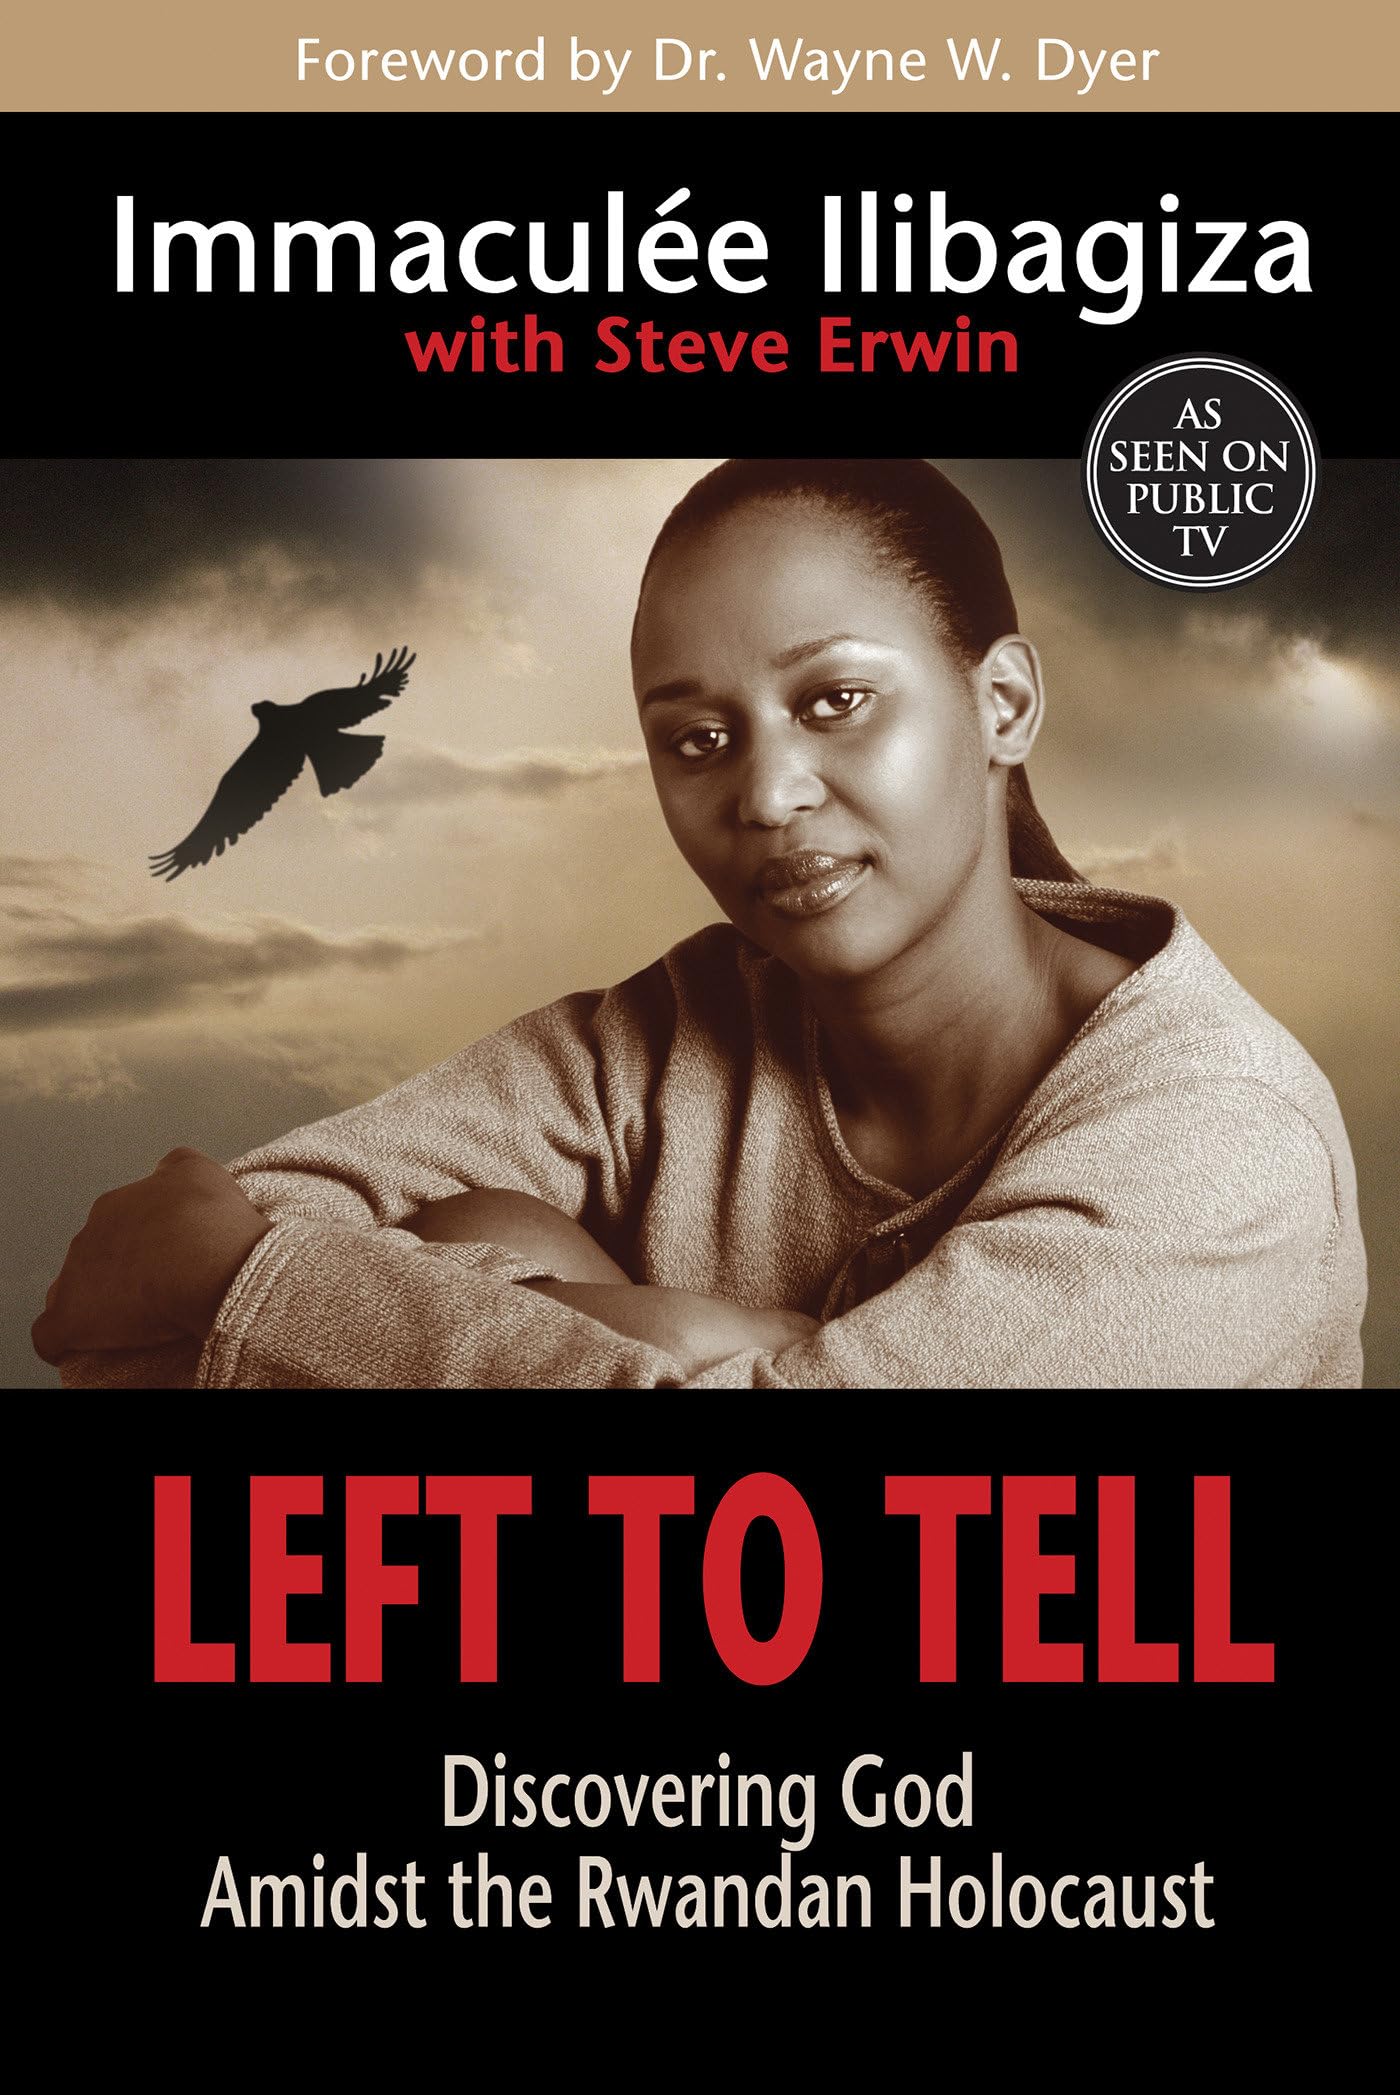 Left to Tell: Discovering God Amidst the Rwandan Holocaust by Ilibagiza, Immaculee